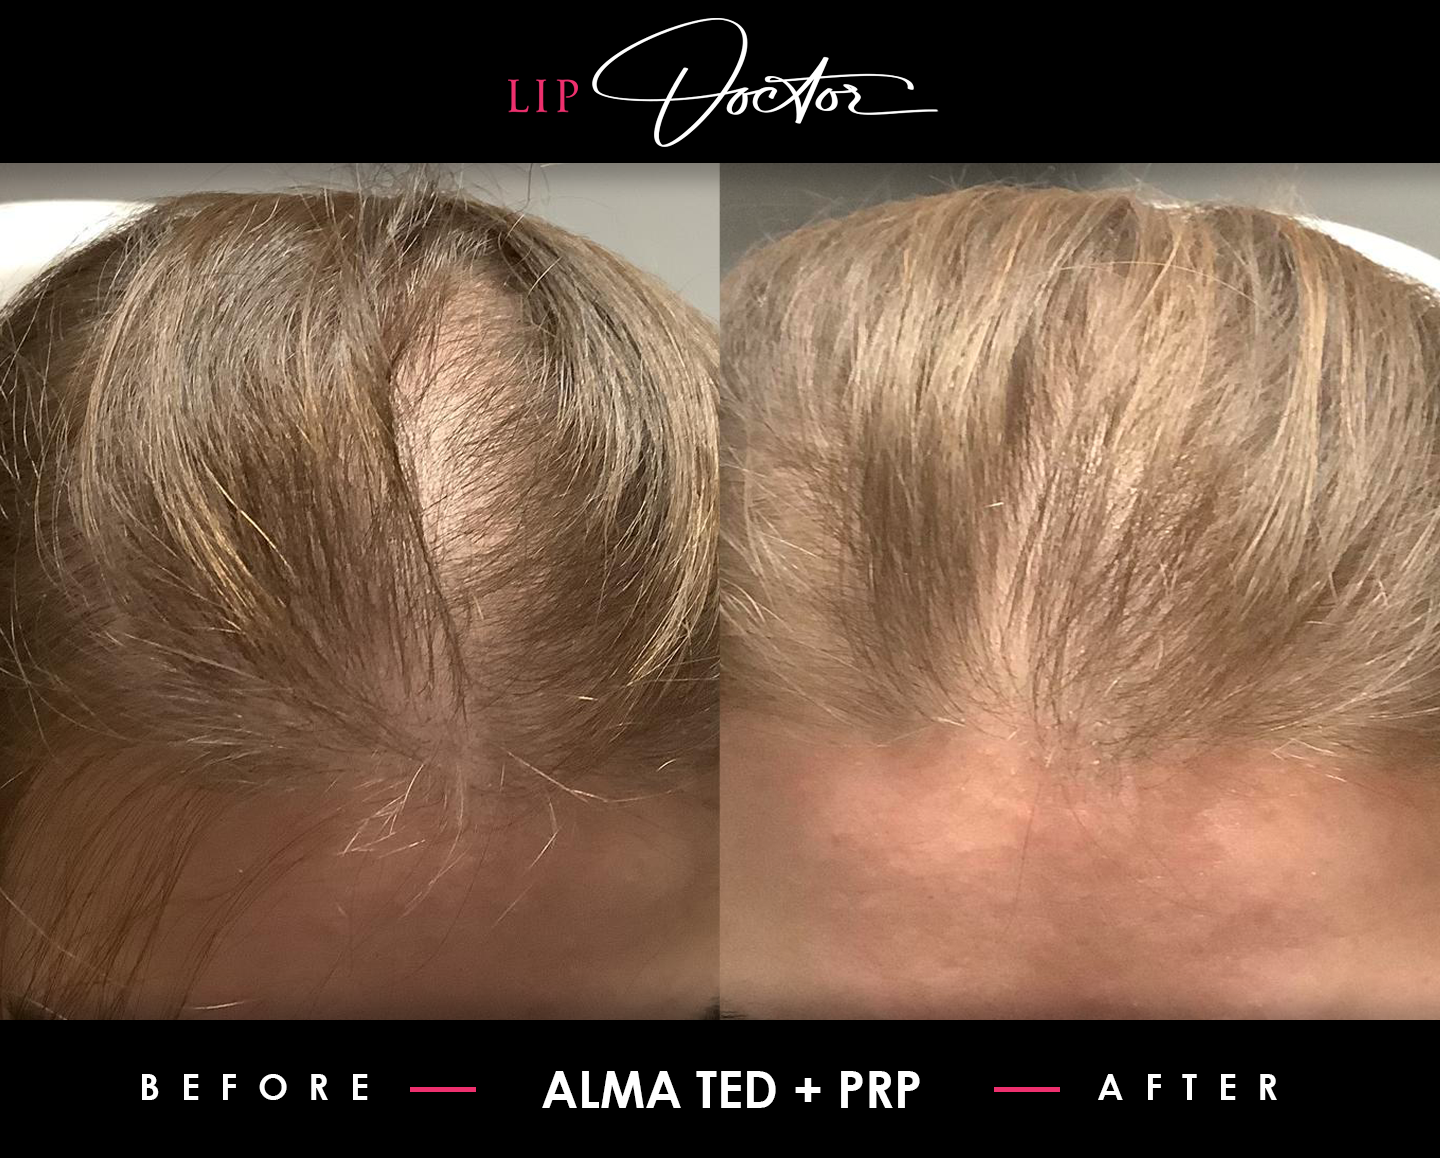 Before and after photo showing the effectiveness of PRP therapy for hair restoration by The Lip Doctor.